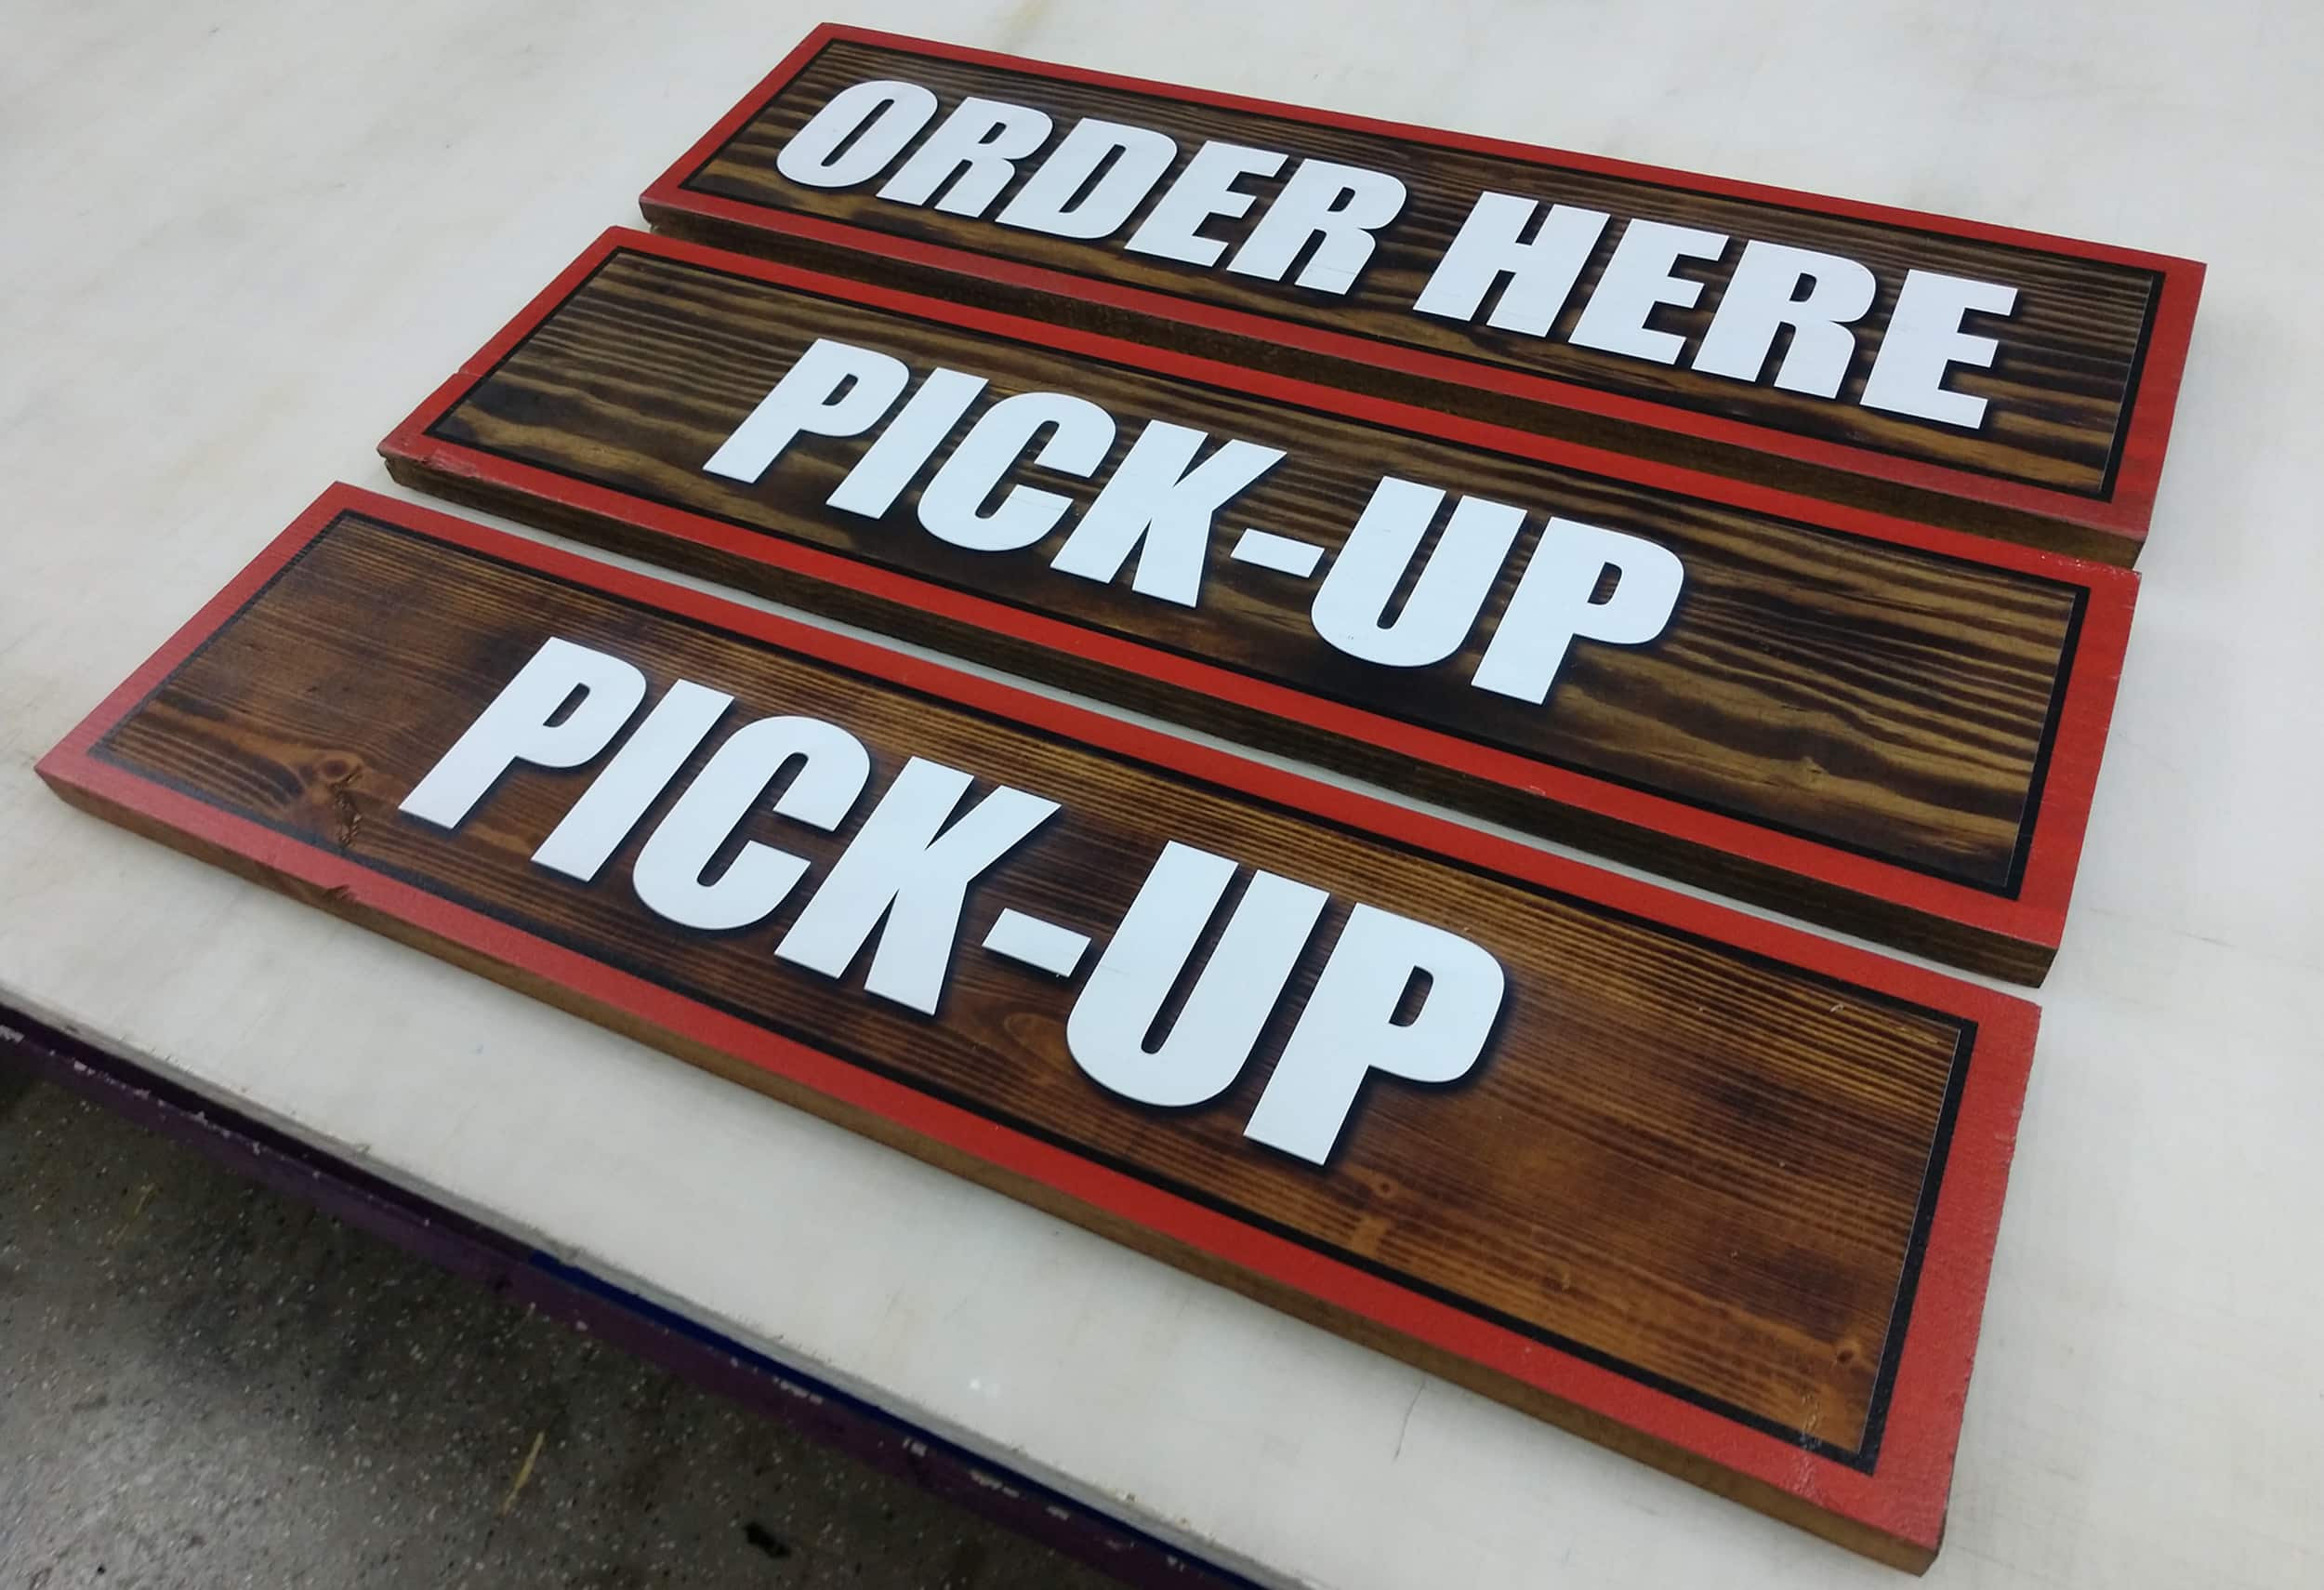 This multi-dimensional, printed text on wood signs was created to elevate a standard project for a client.